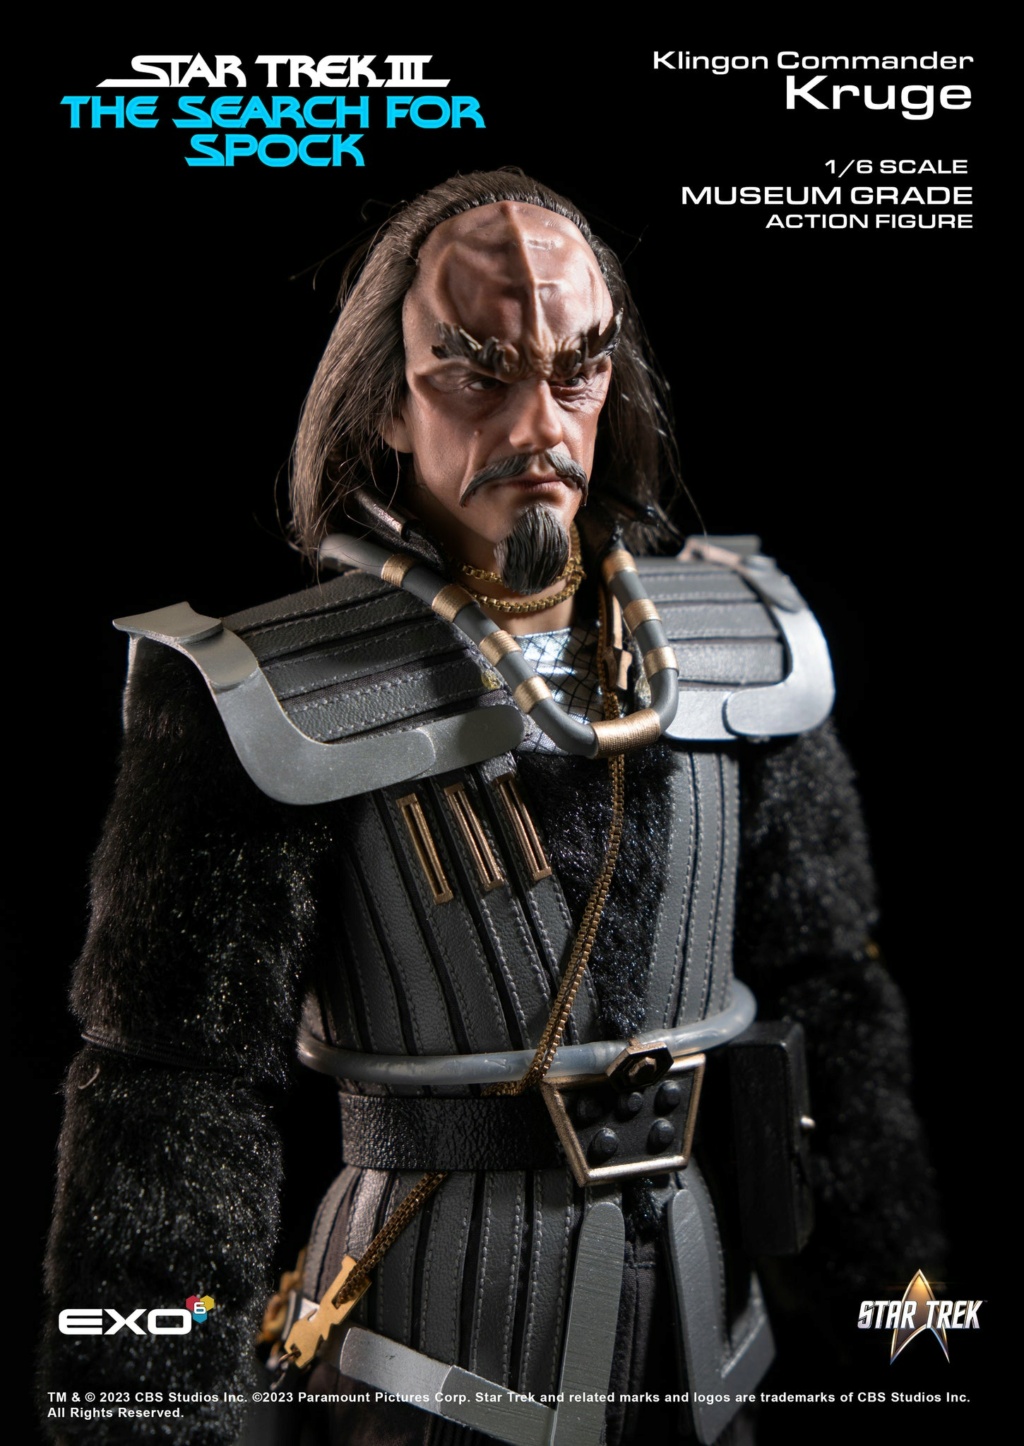 Kruge - NEW PRODUCT: EXO-6: Star Trek III: The Search For Spock: Klingon Commander Kruge 1/6 scale action figure 1463